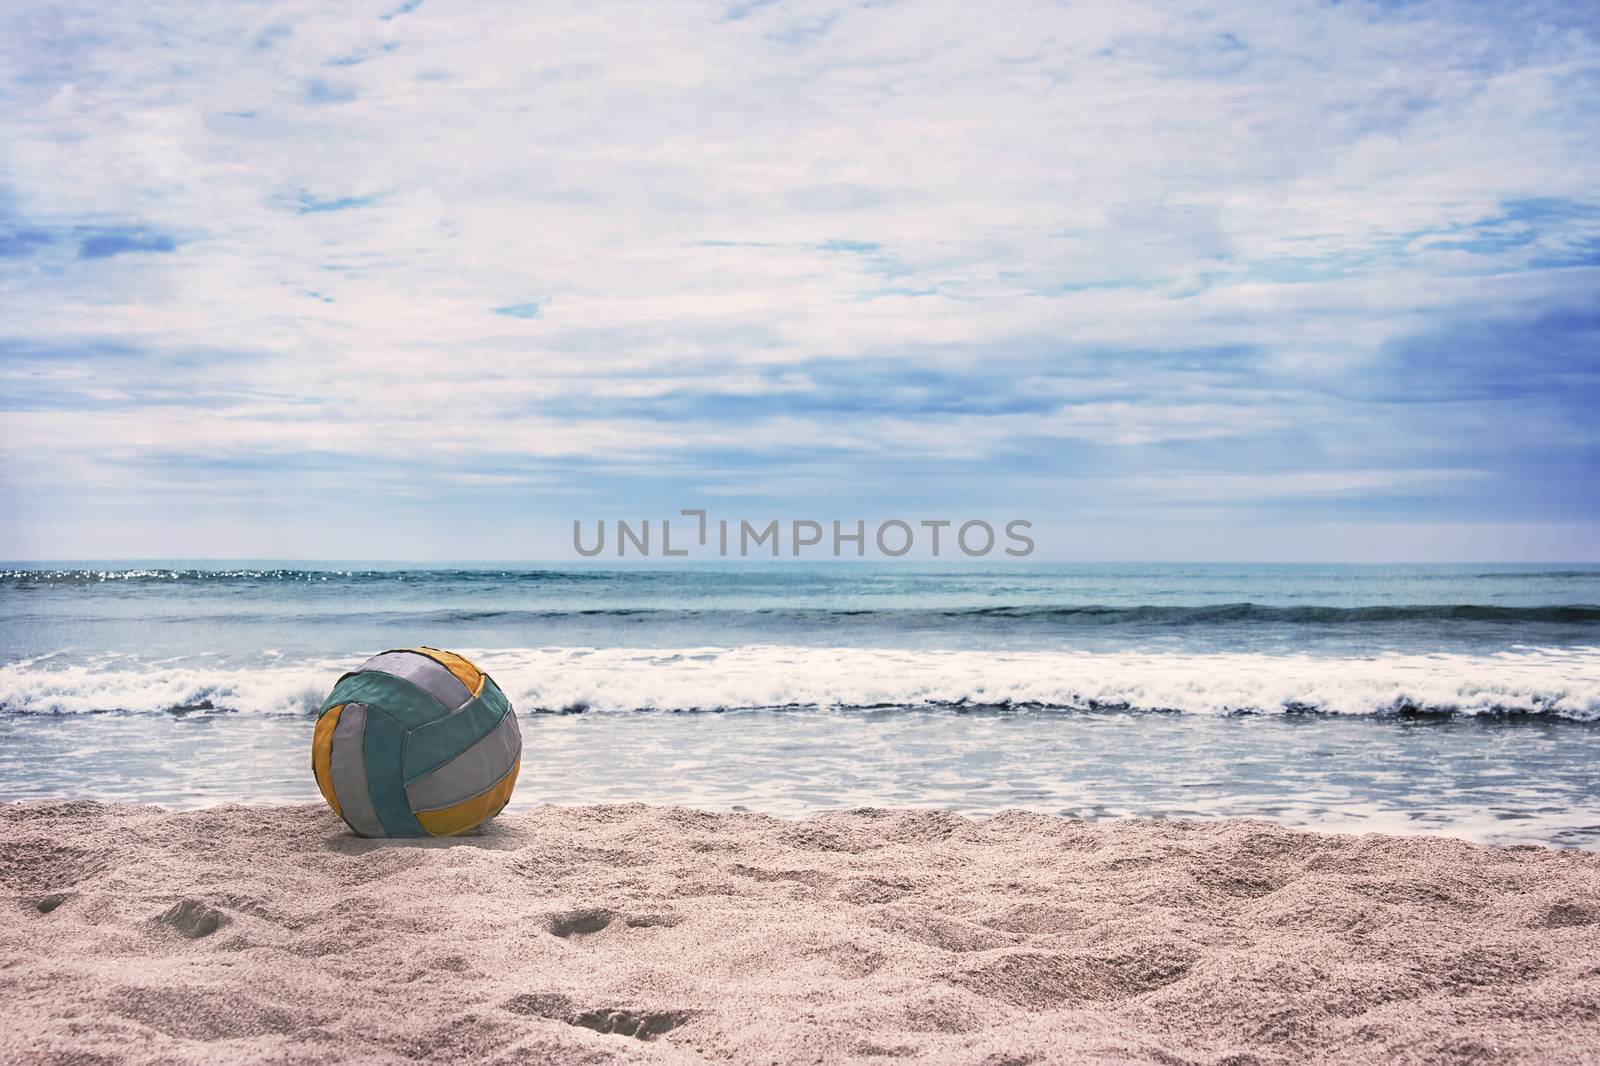 Volleyball ball on empty beach against blue sky and turquoise ocean. Summer.